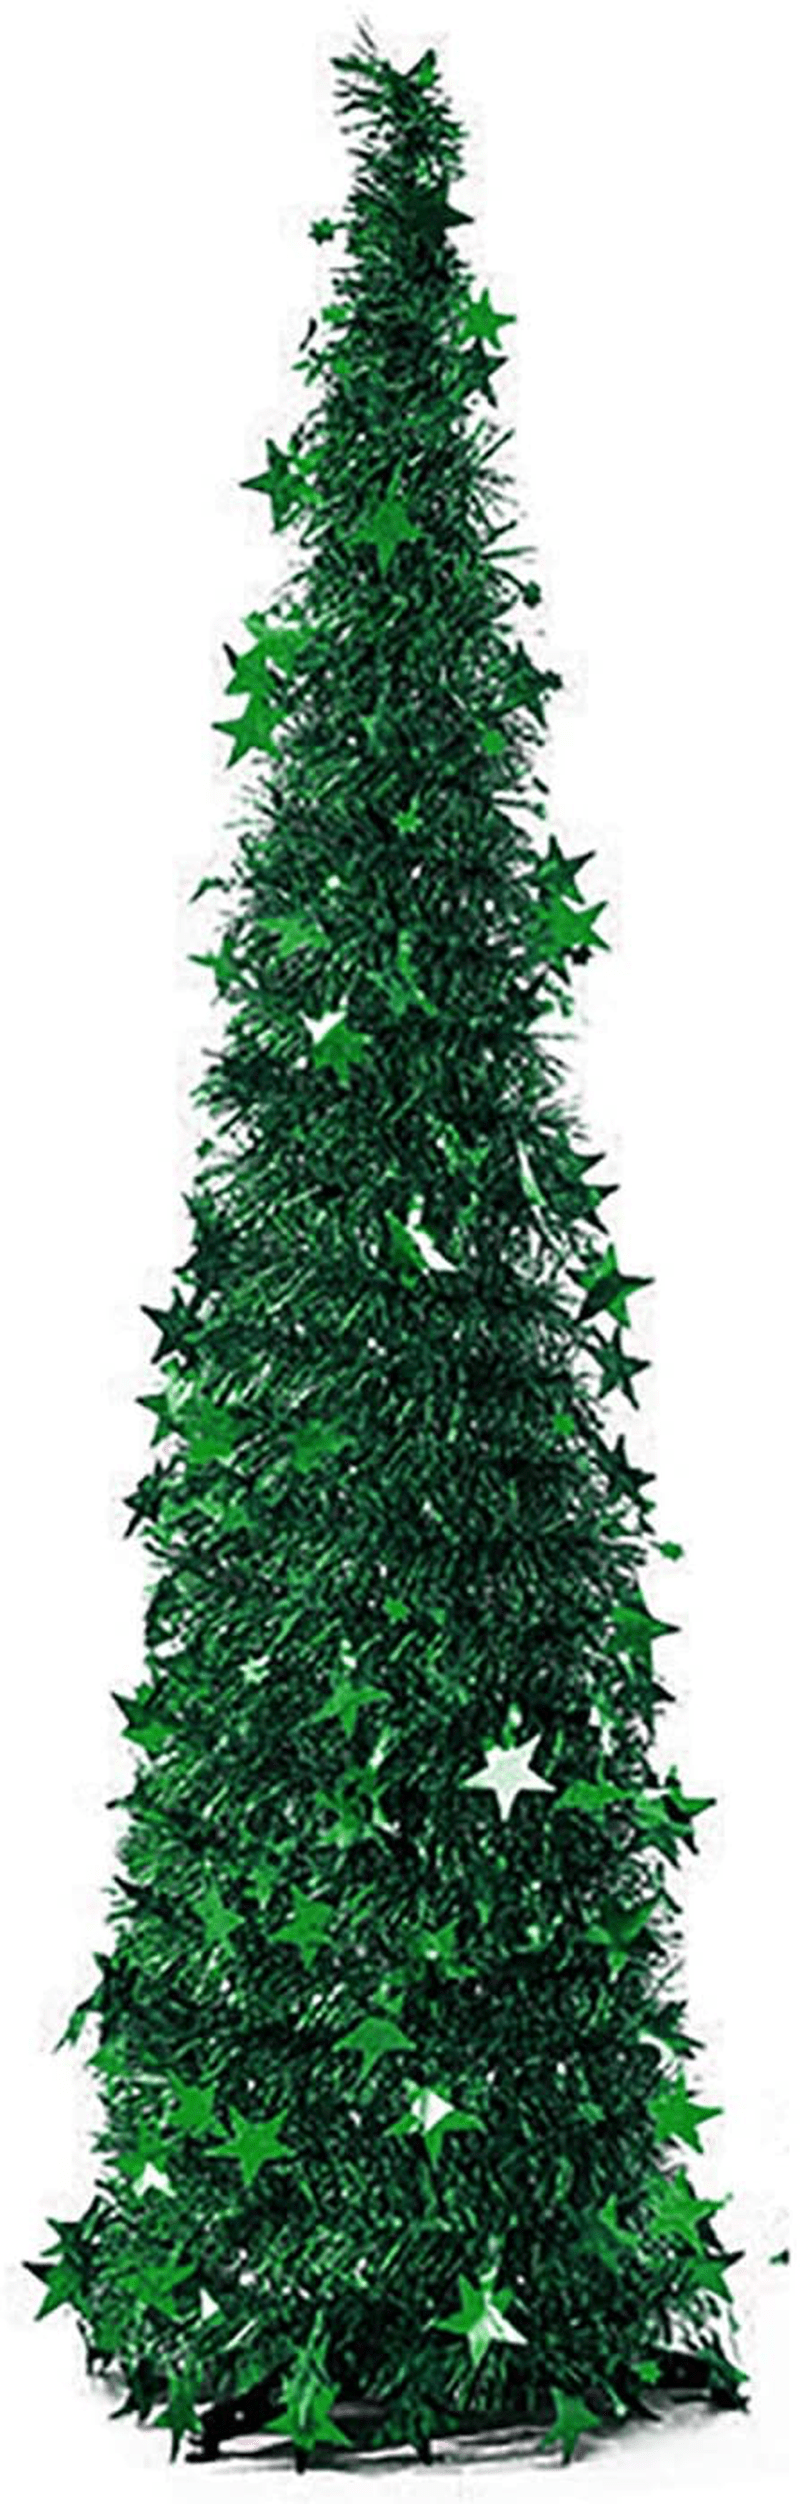 Artificial Christmas Tree Metal Stand, Glittery Tinsel Christmas Tree, 47inch Collapsible Xmas Trees with Plump Sequin for Holiday Decor - Easy to Assemble (Silver)